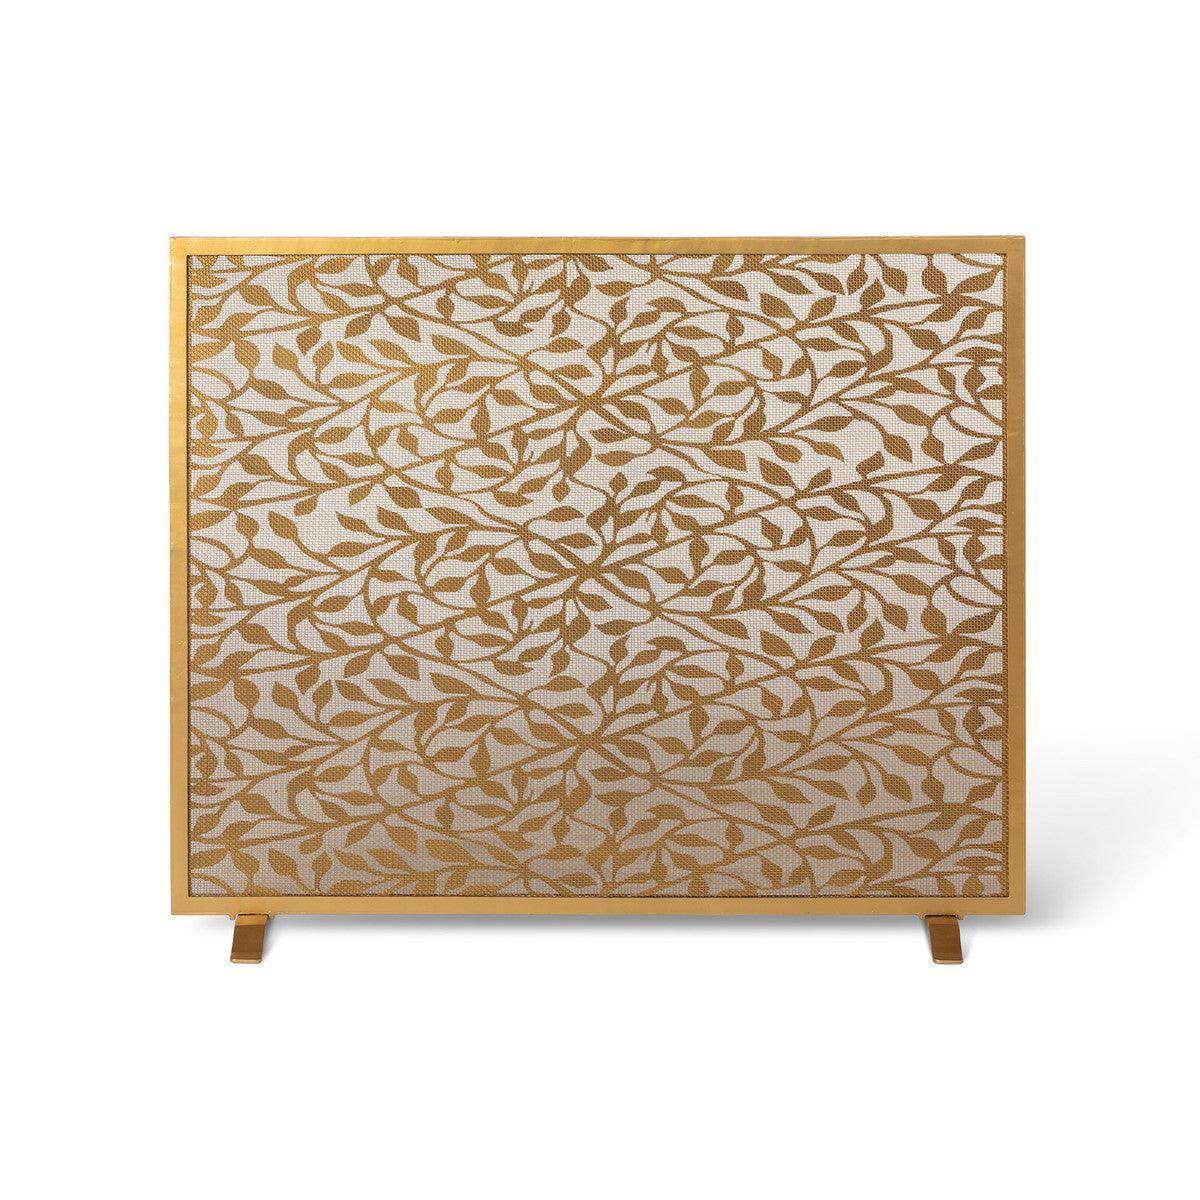 Floral Vine Pattern Fire Screen - Signastyle Boutique